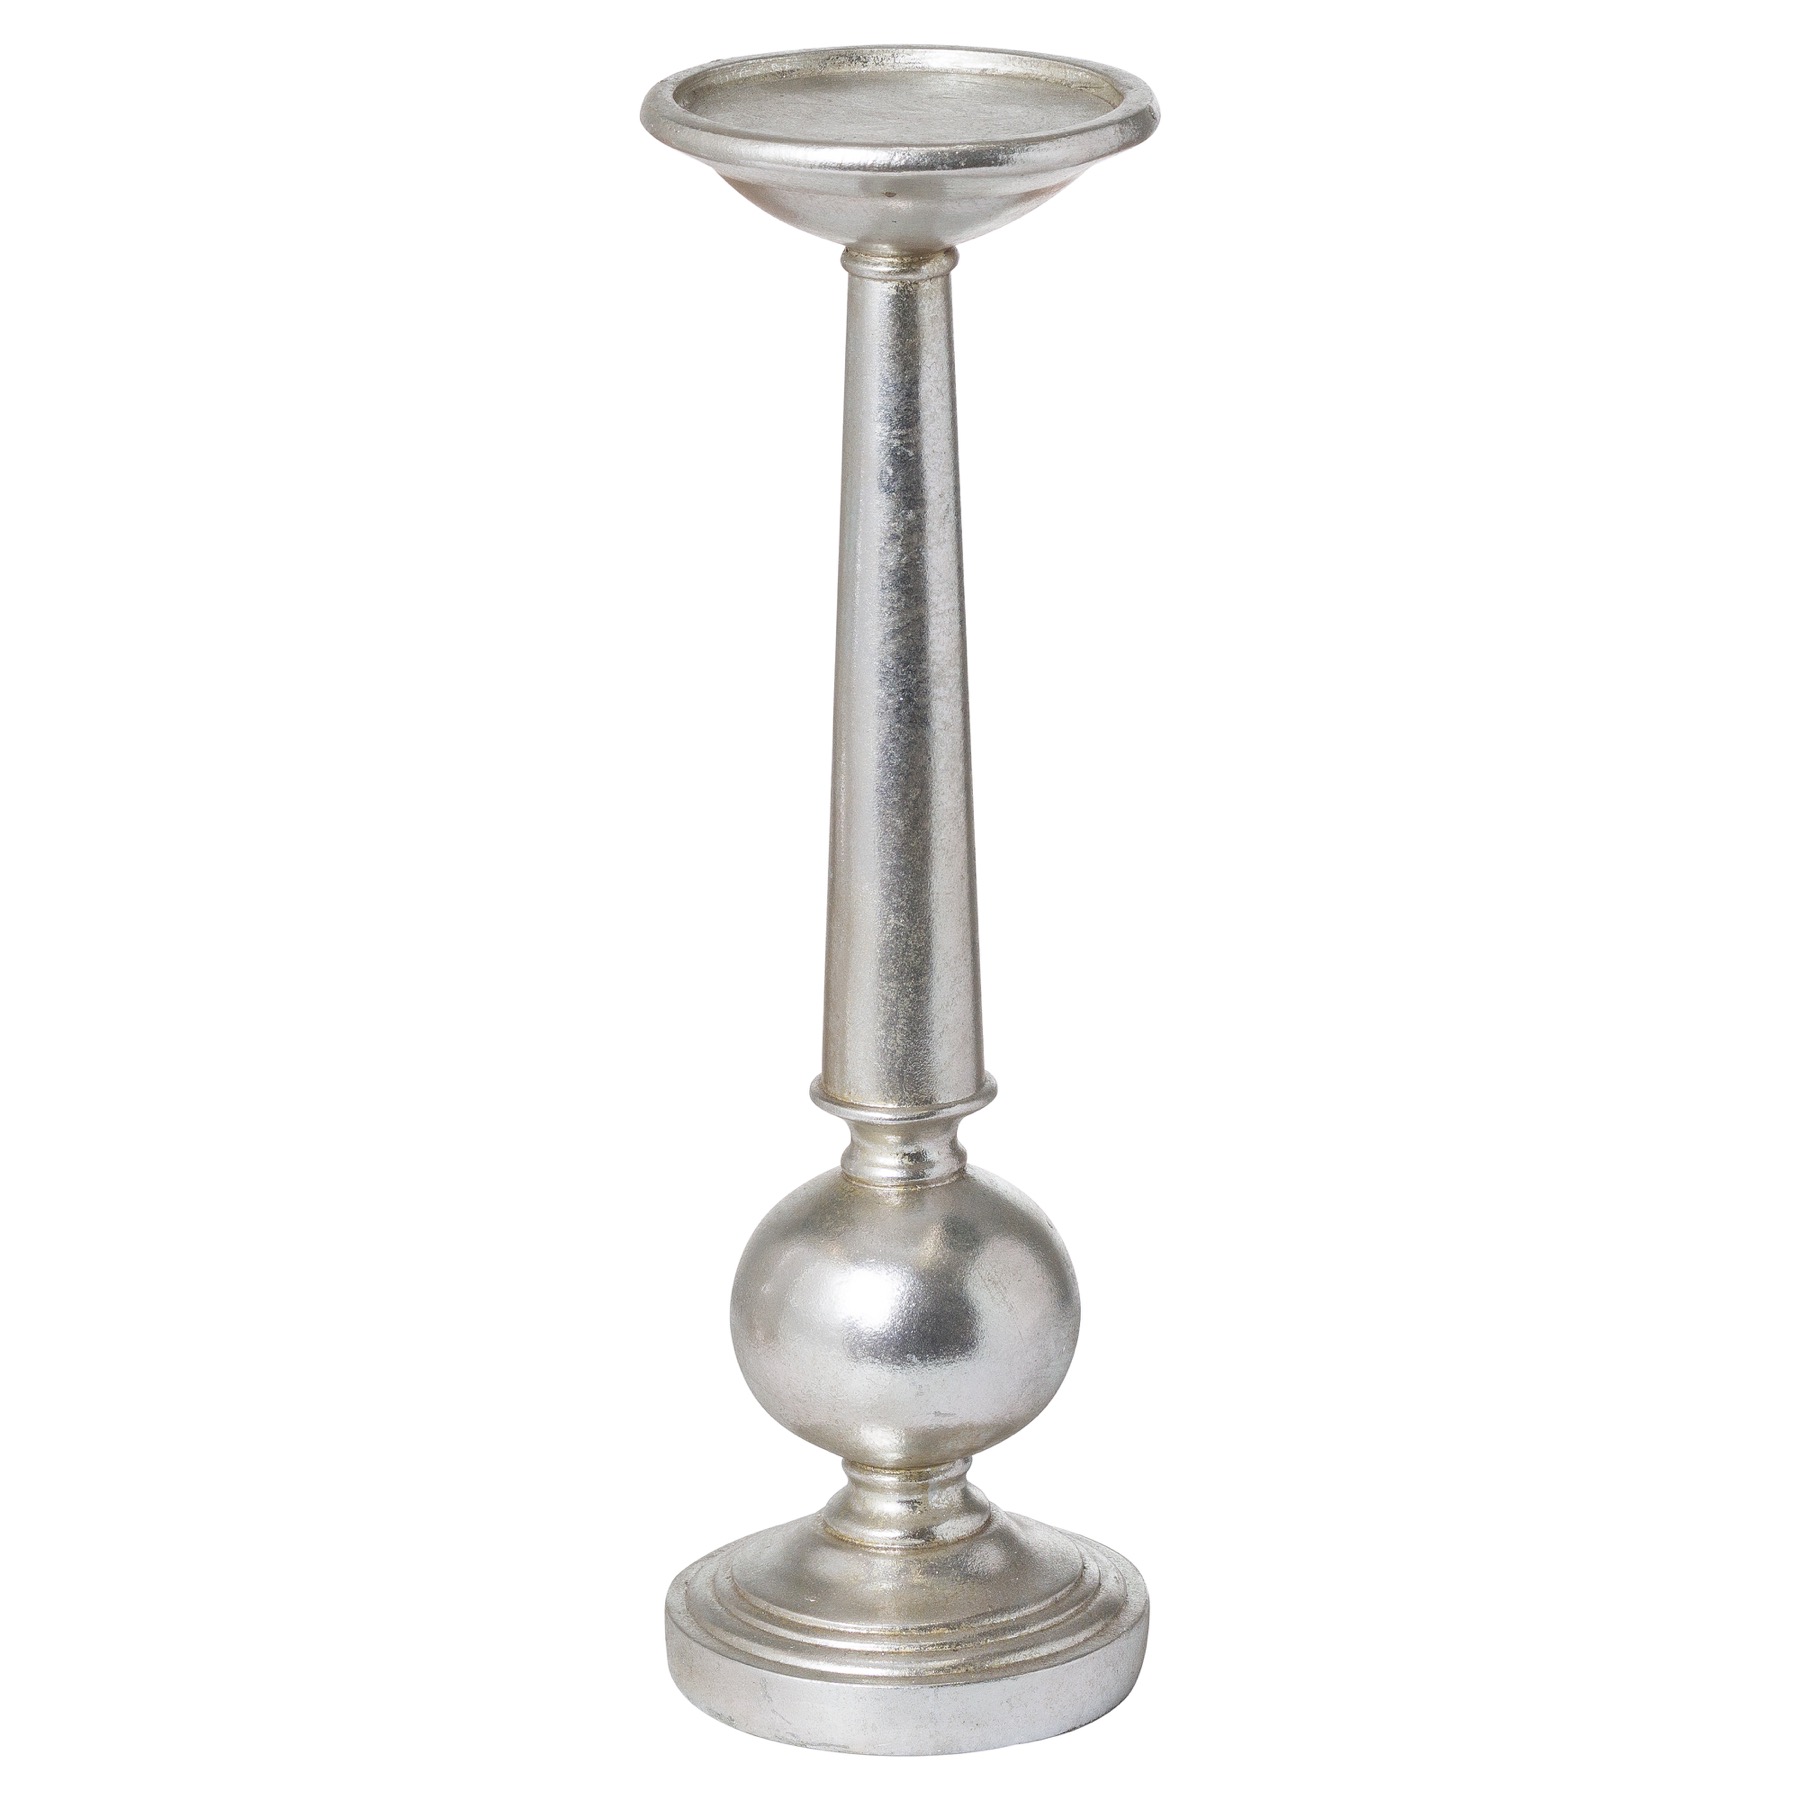 Antique Silver Small Column Candle Stand - Image 1